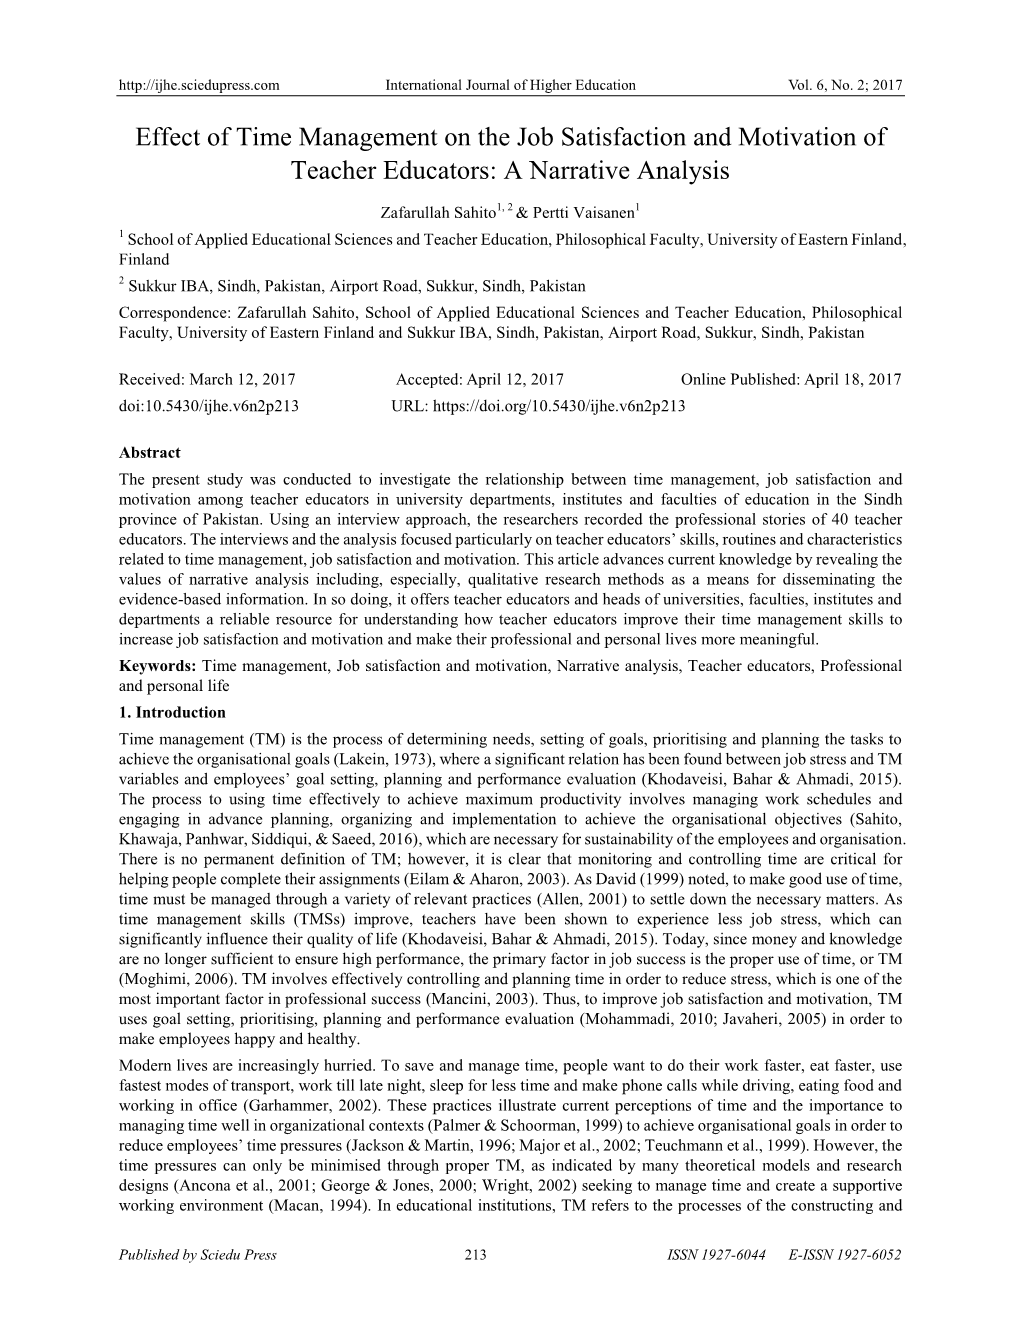 Effect of Time Management on the Job Satisfaction and Motivation of Teacher Educators: a Narrative Analysis